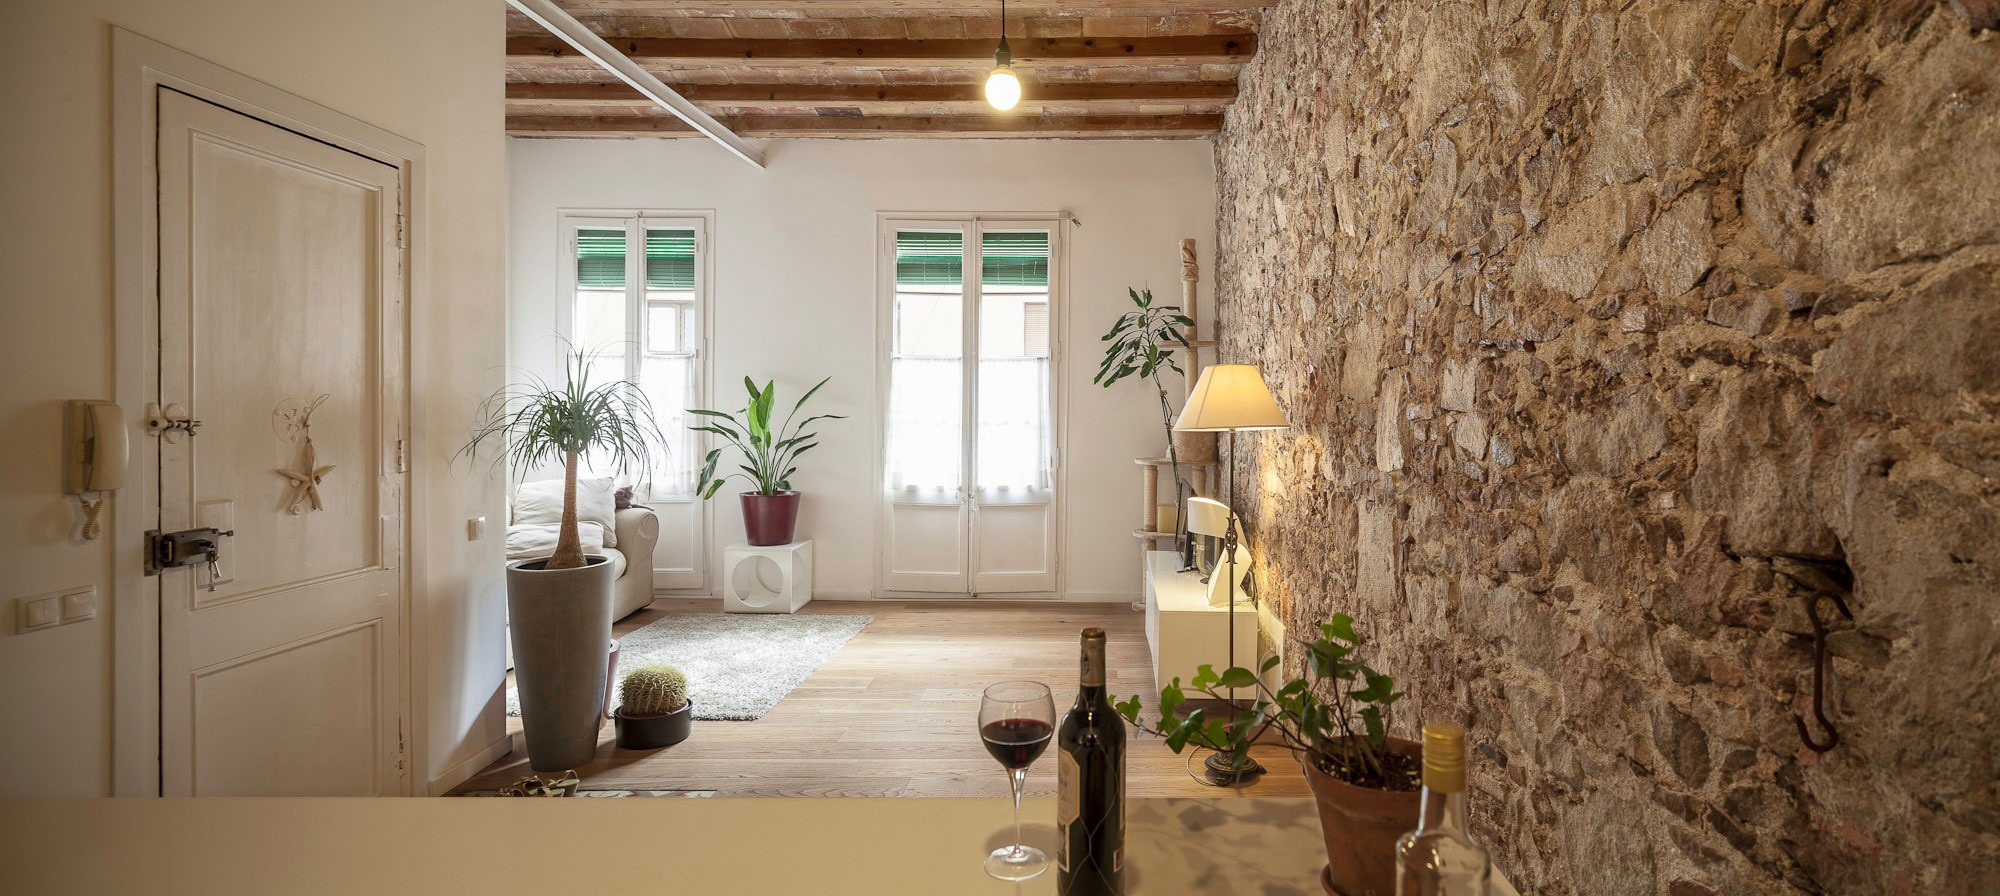 Renovation-Apartment-in-Les-Corts-living-room-windows